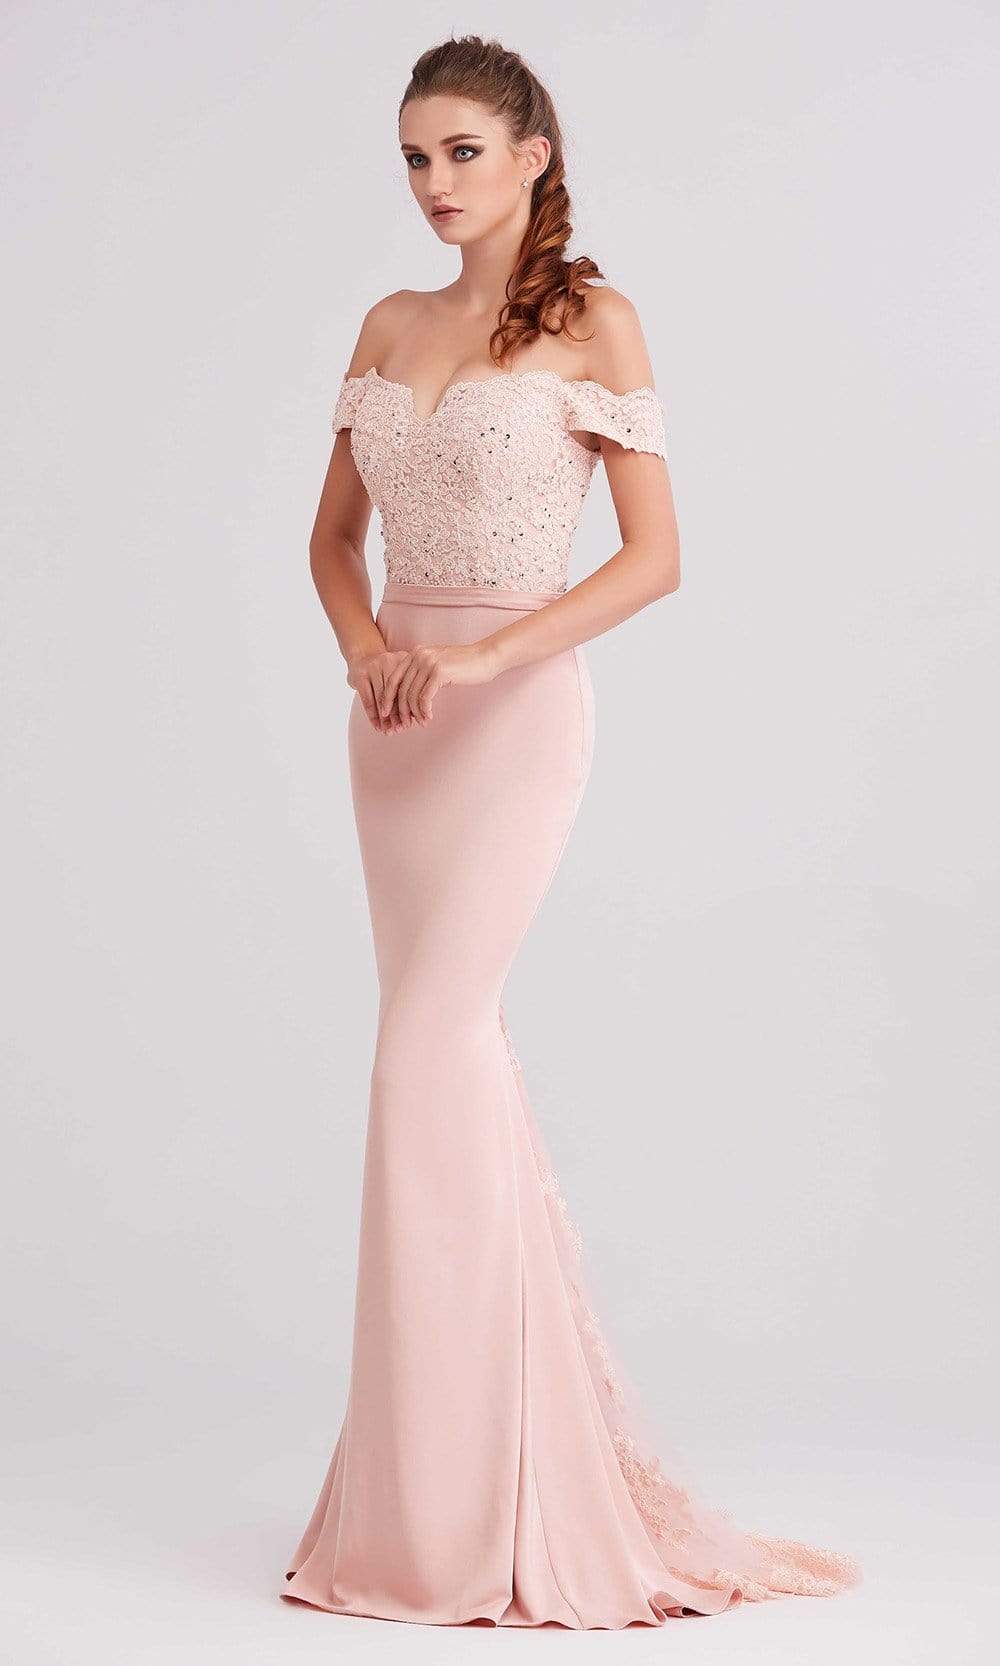 J'Adore - J15016 Off Shoulder Beaded Lace Bodice Mermaid Dress Special Occasion Dress 2 / Dusty Pink